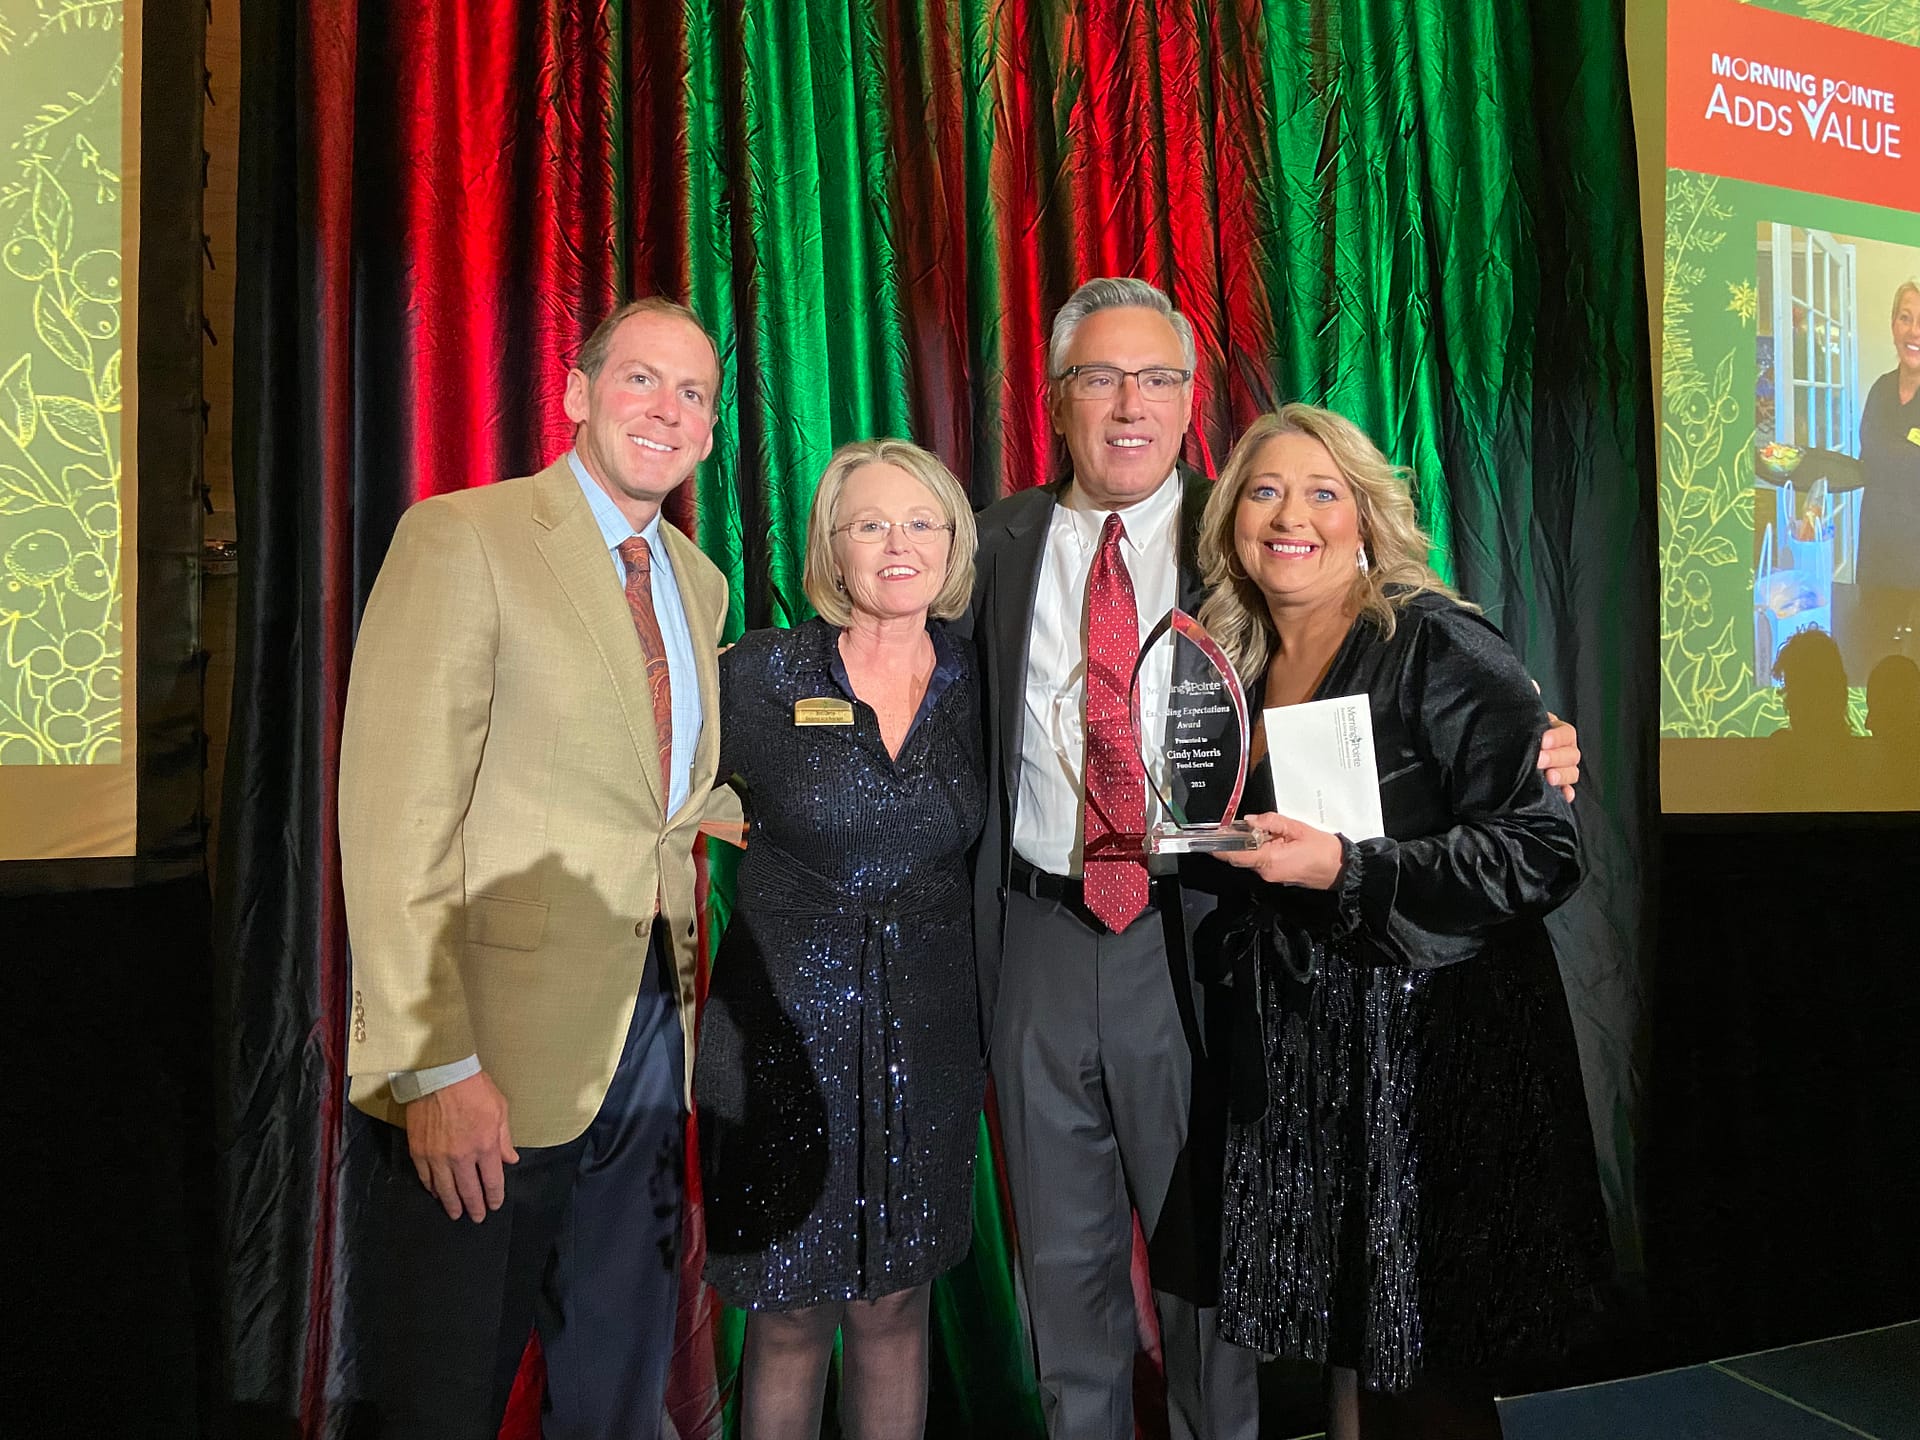 Photo, Left to right: Franklin Farrow, Morning Pointe Senior Living Co-Founder and CEO; Staci Dennis, Vice President of Morning Pointe's Bluegrass Region; Greg A. Vital, Morning Pointe Co-Founder and President; and Cindy Morris, Food Service Director at Morning Pointe of Russell and Exceeding Expectations winner for Food Service